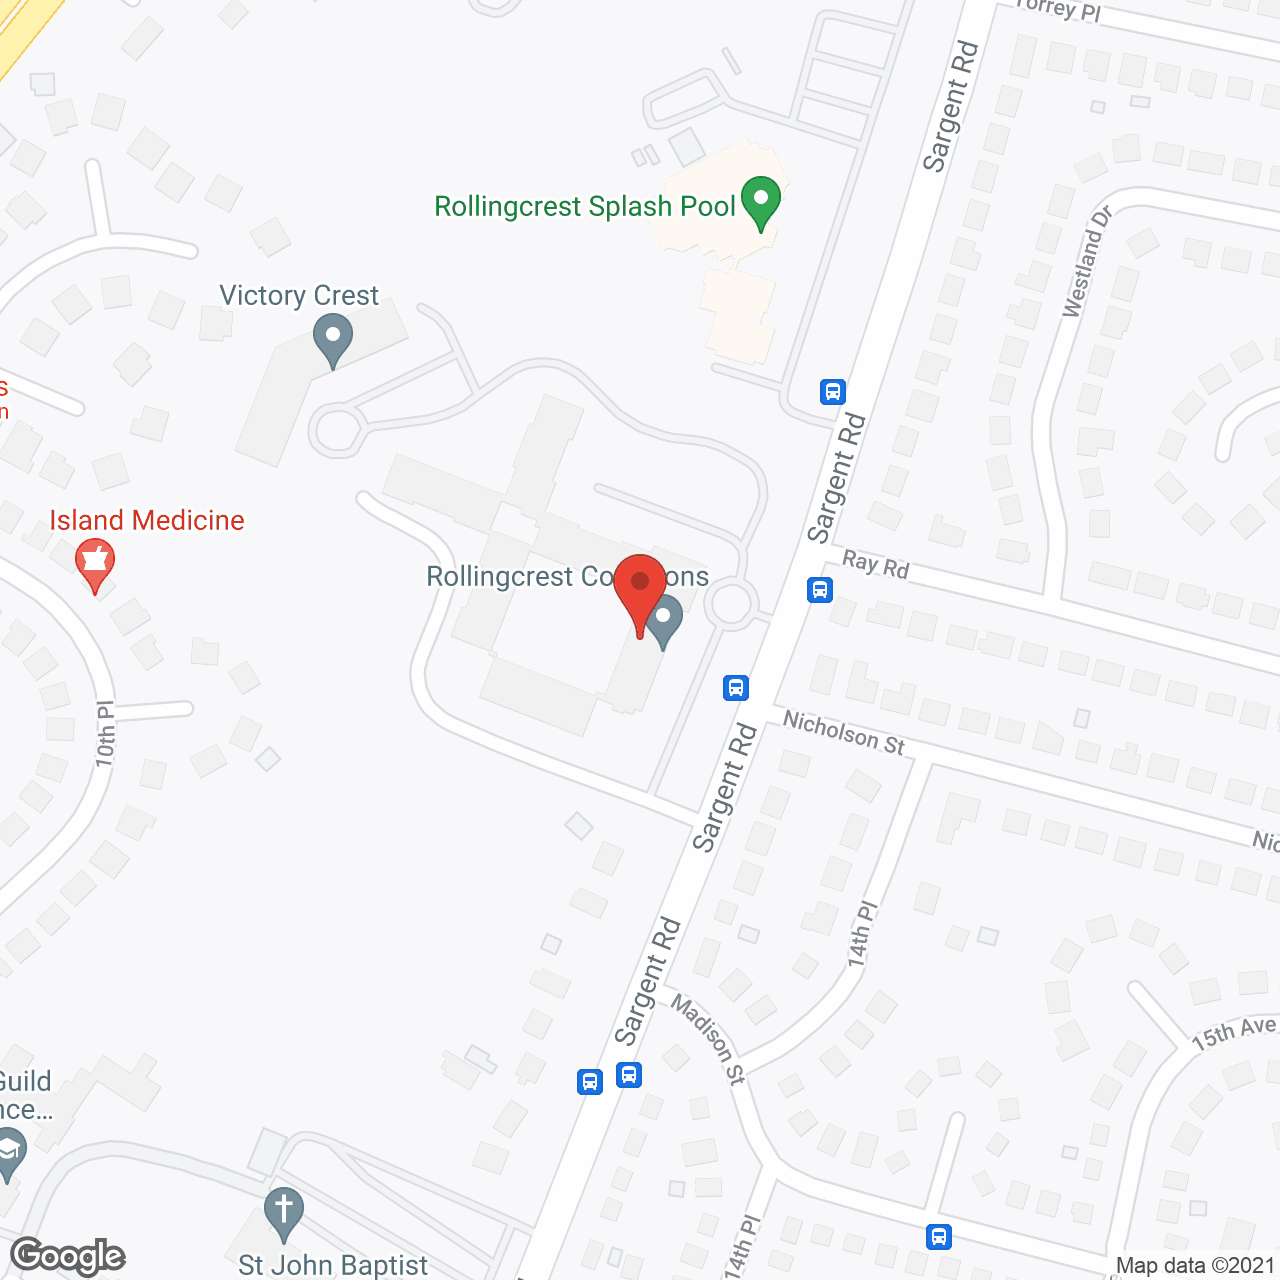 Rollingcrest Commons in google map